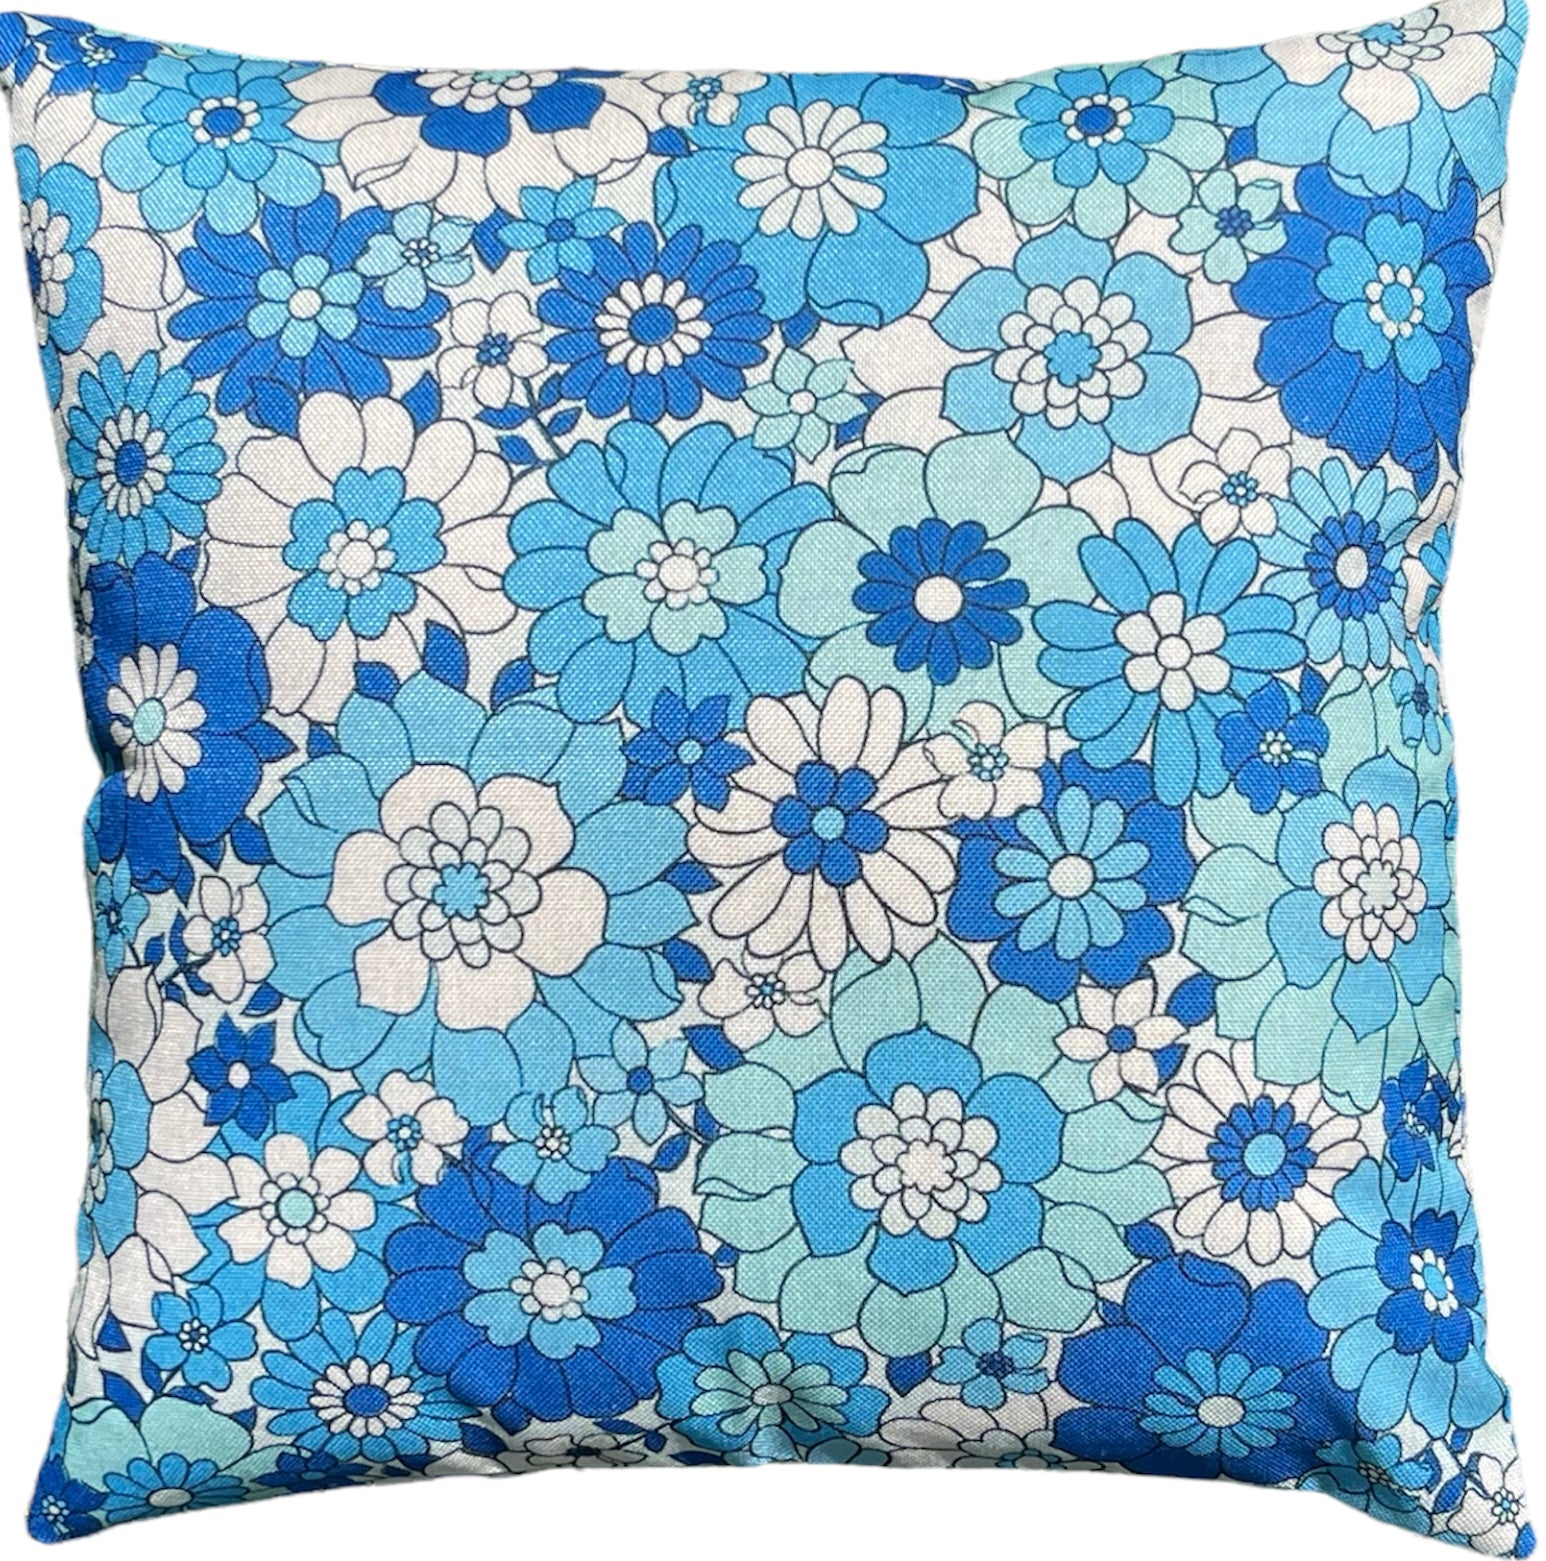 http://relic828.com/cdn/shop/products/groovy-blue-and-white-flower-power-18-by-18-inch-pillow-case-cover-438415.jpg?v=1650654161